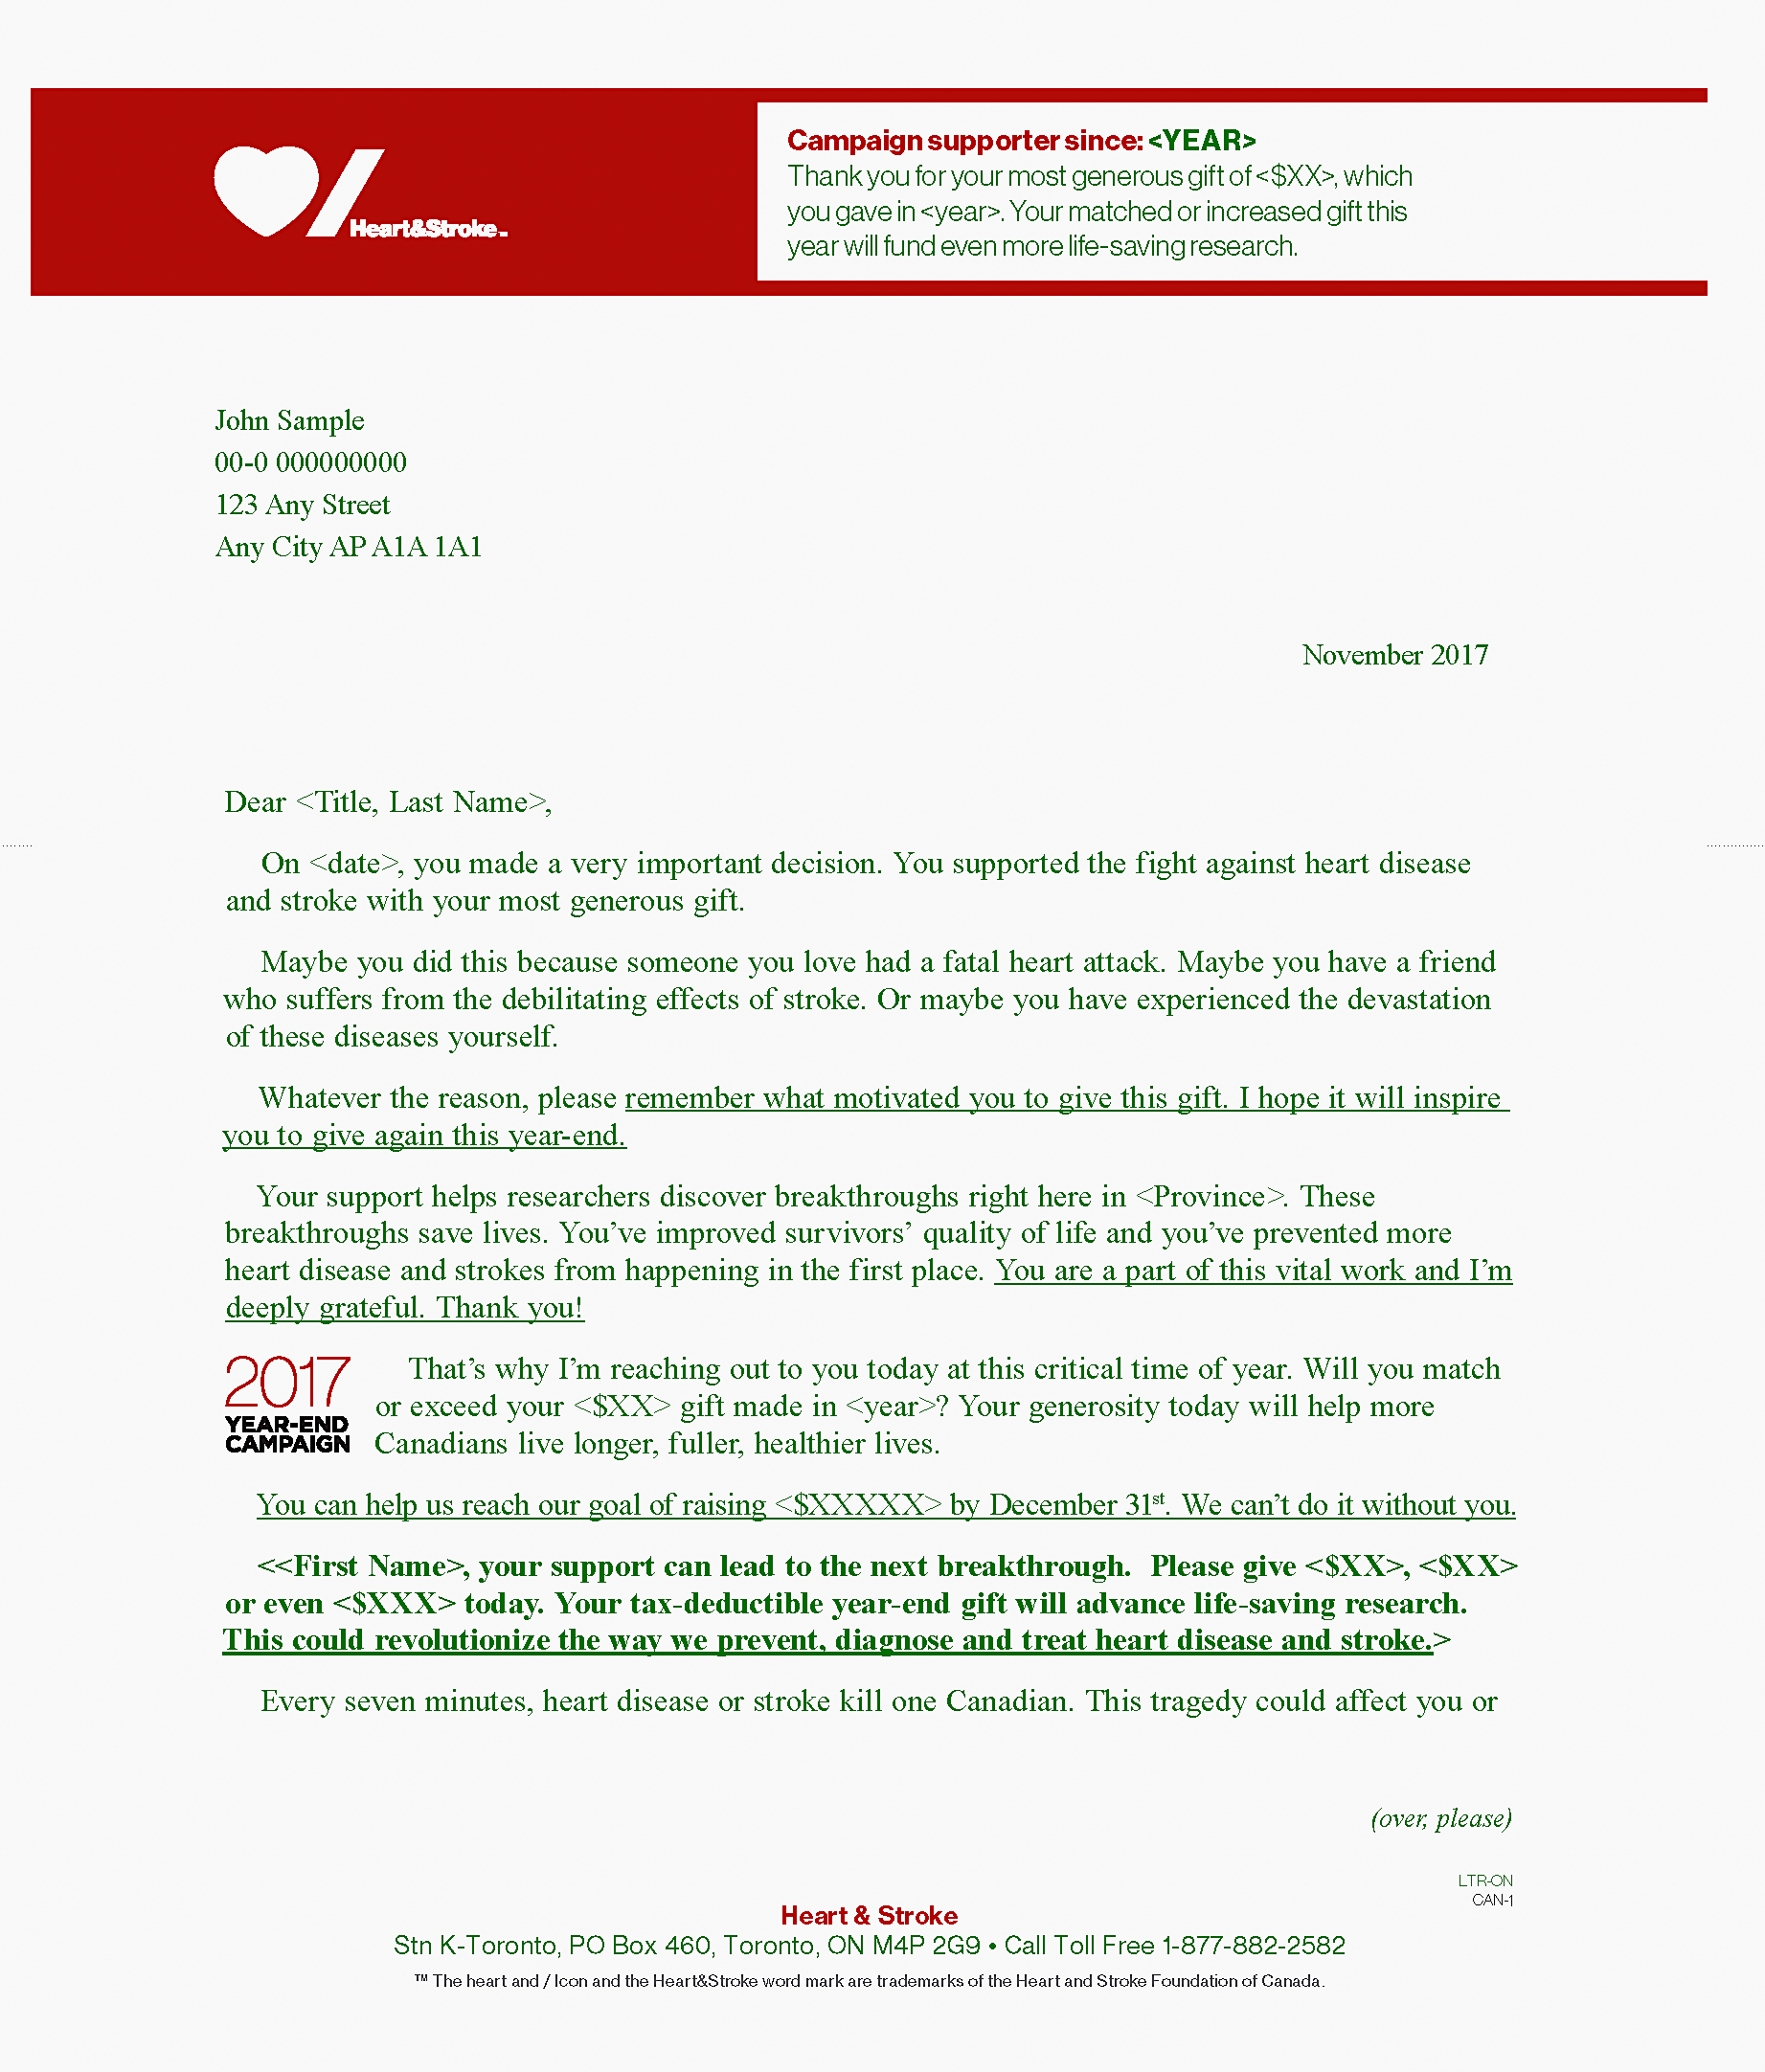 Control letter (page 1)